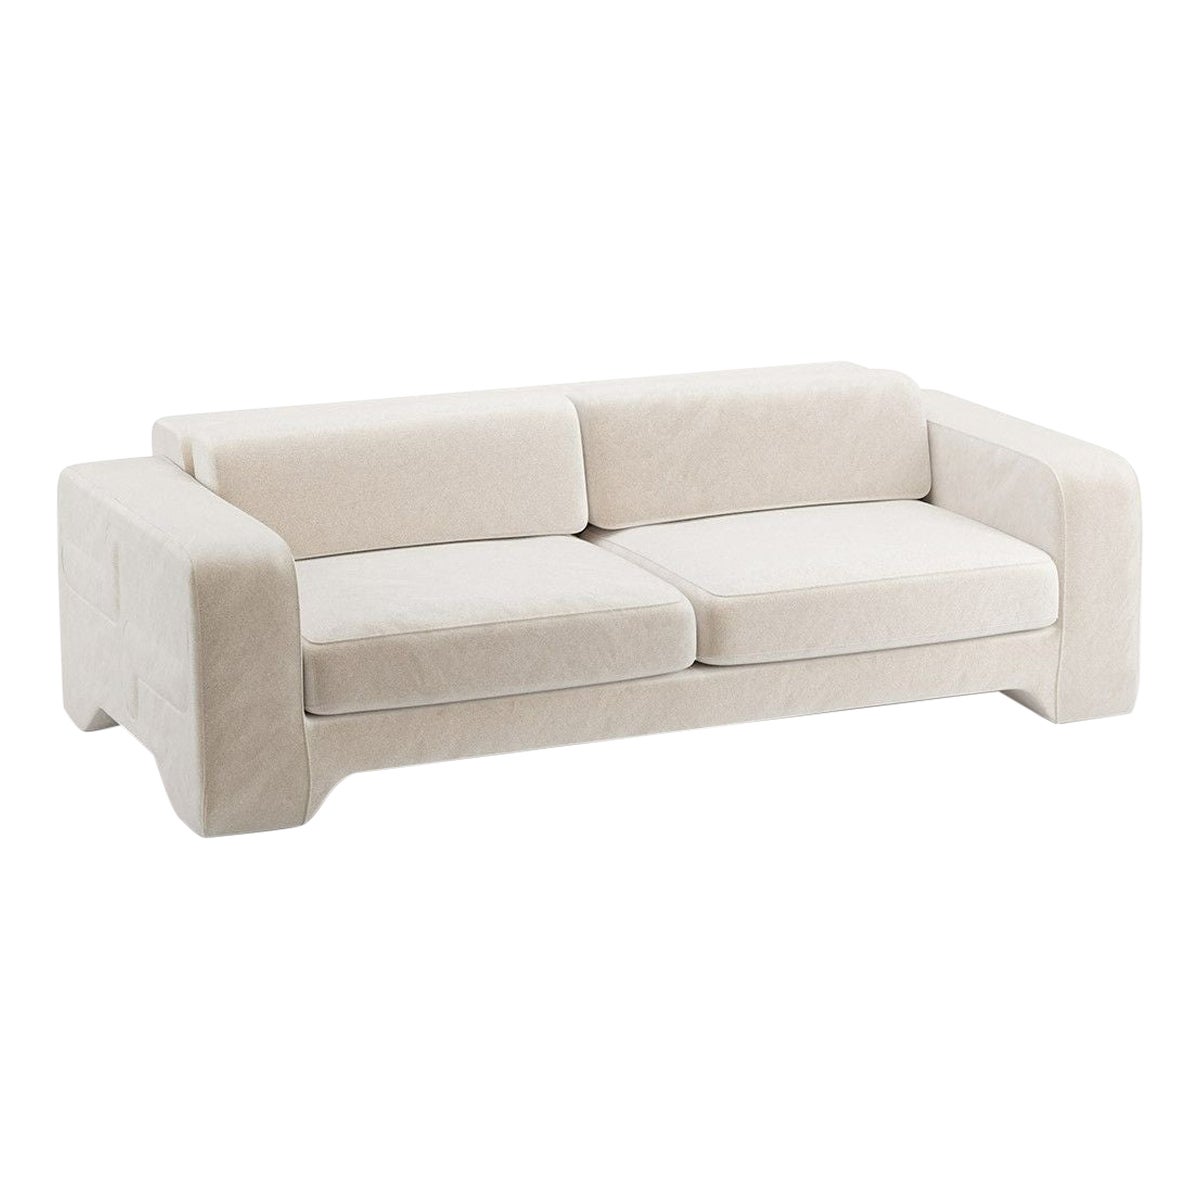 Popus Editions Giovanna 4 Seater Sofa in Egg Shell Off-White Como Velvet Fabric